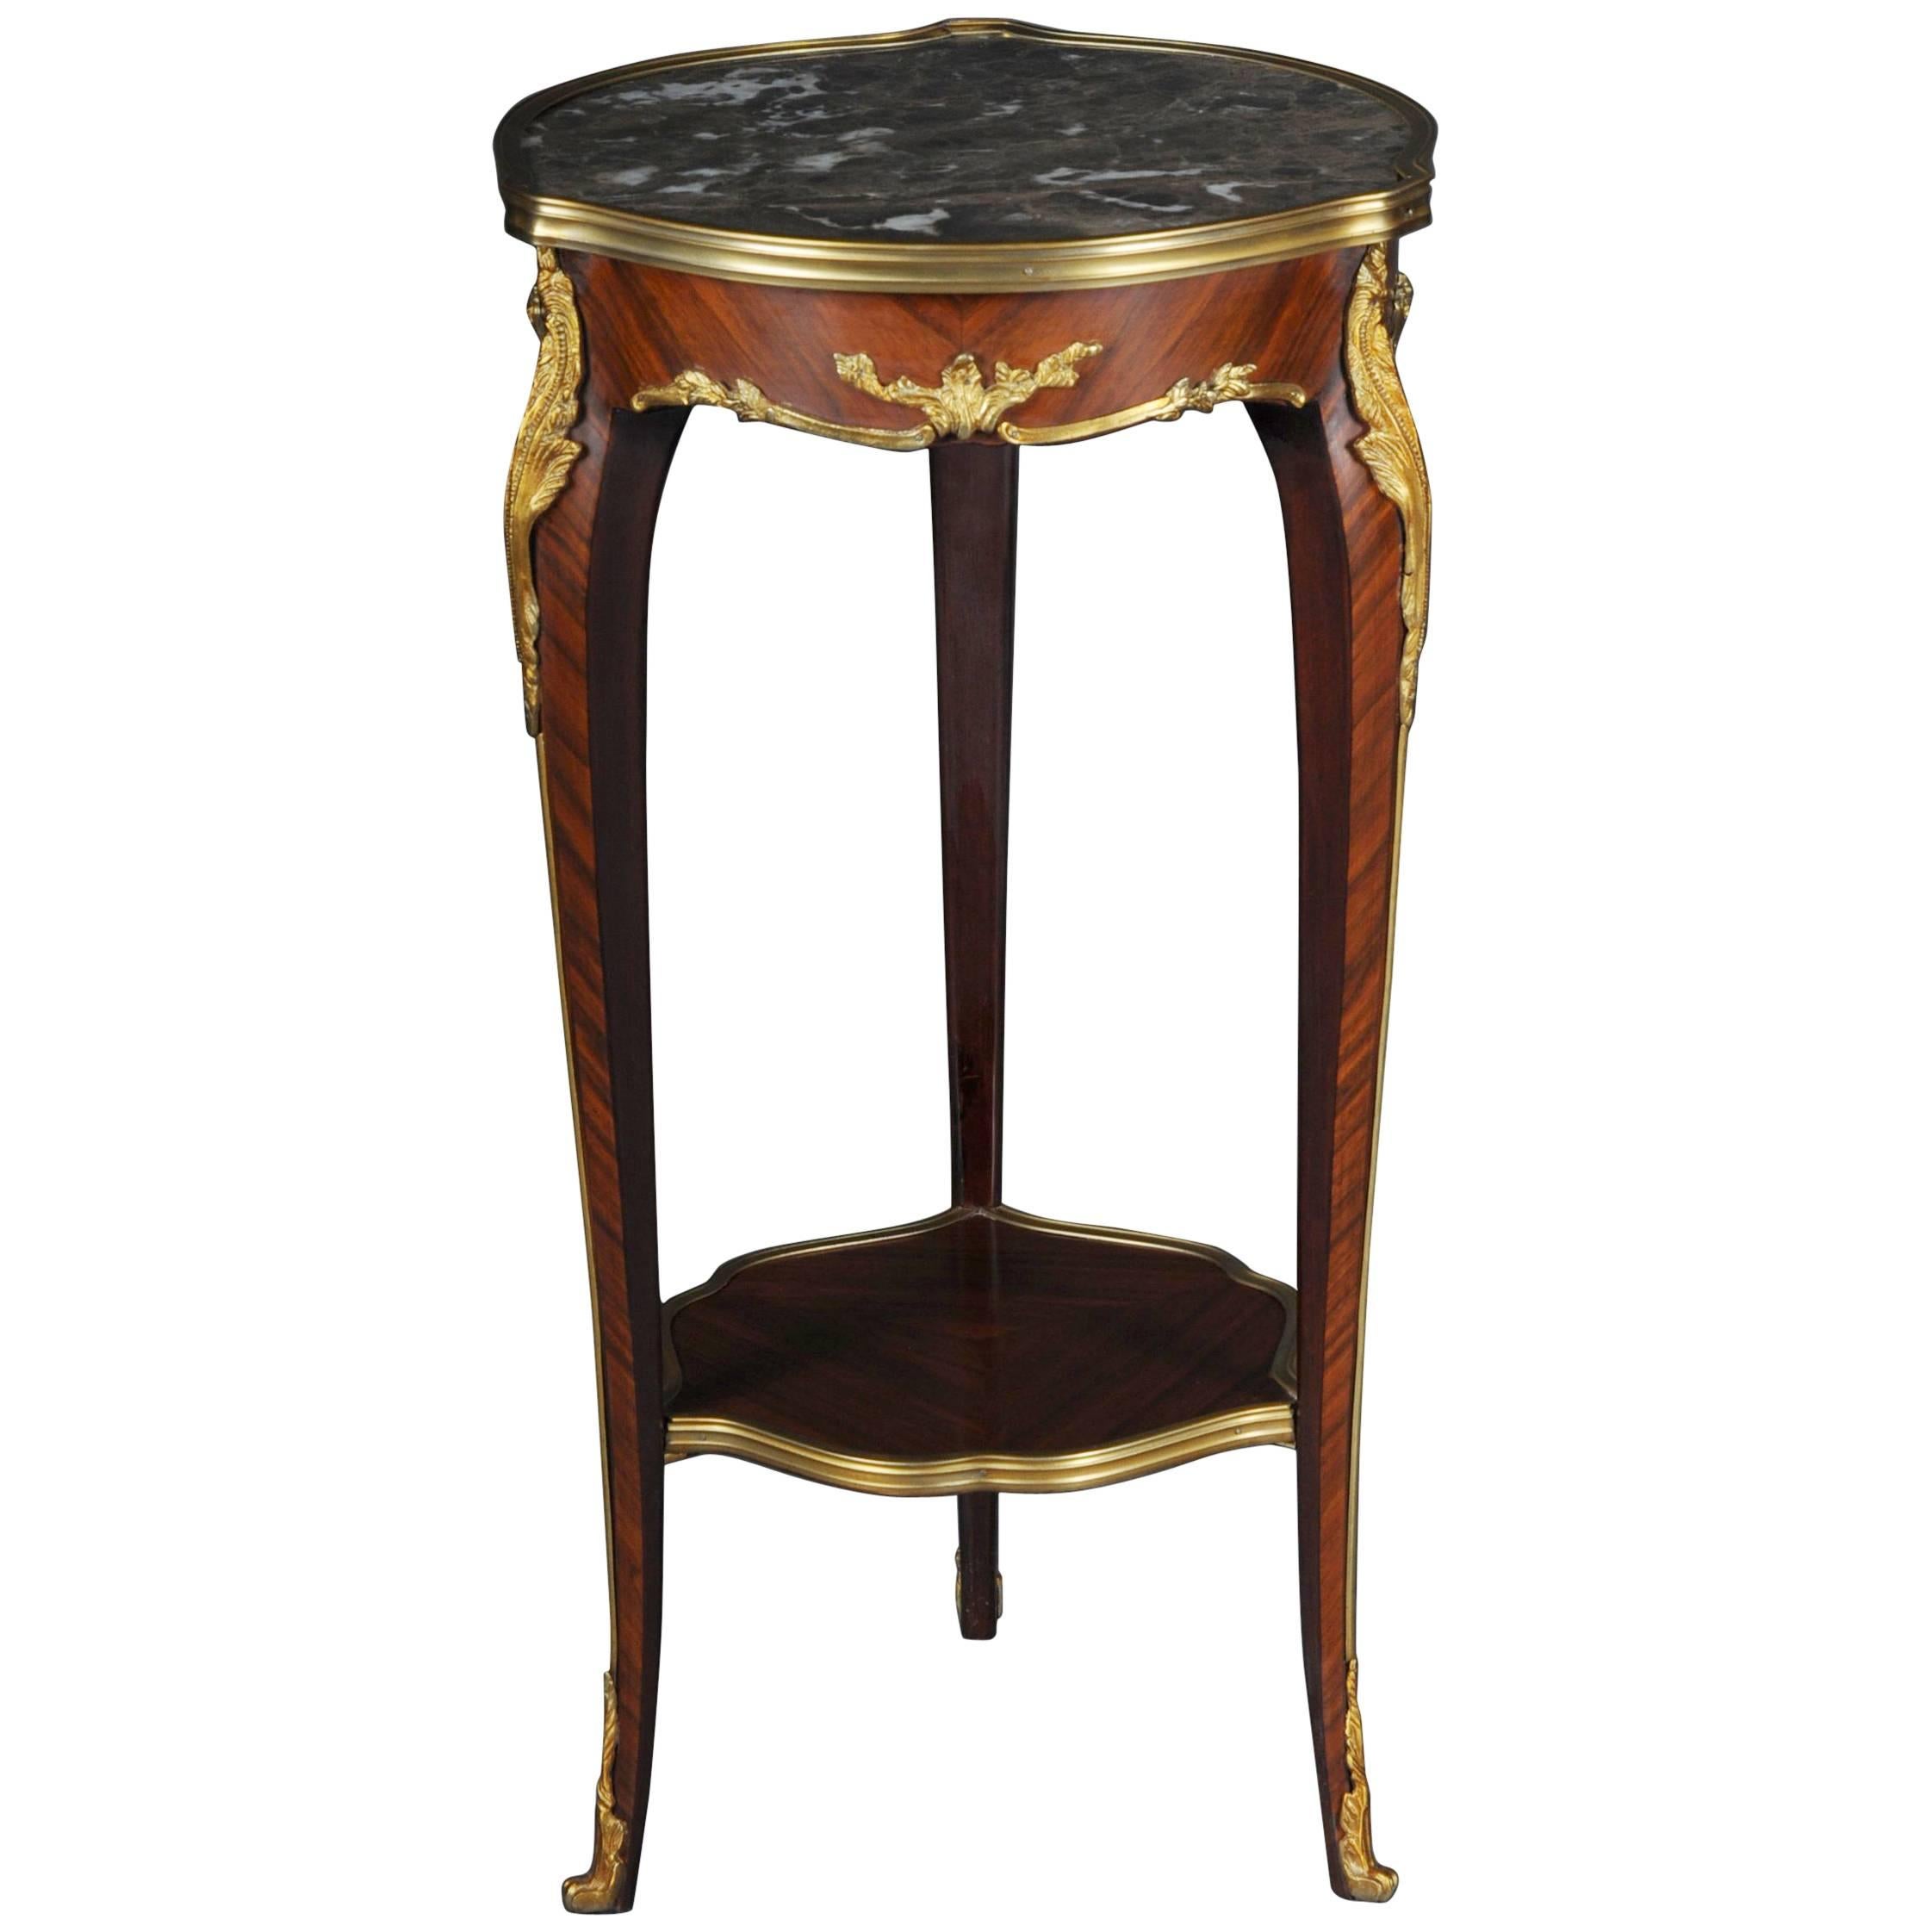 French Salon Side Table in Louis Quinze